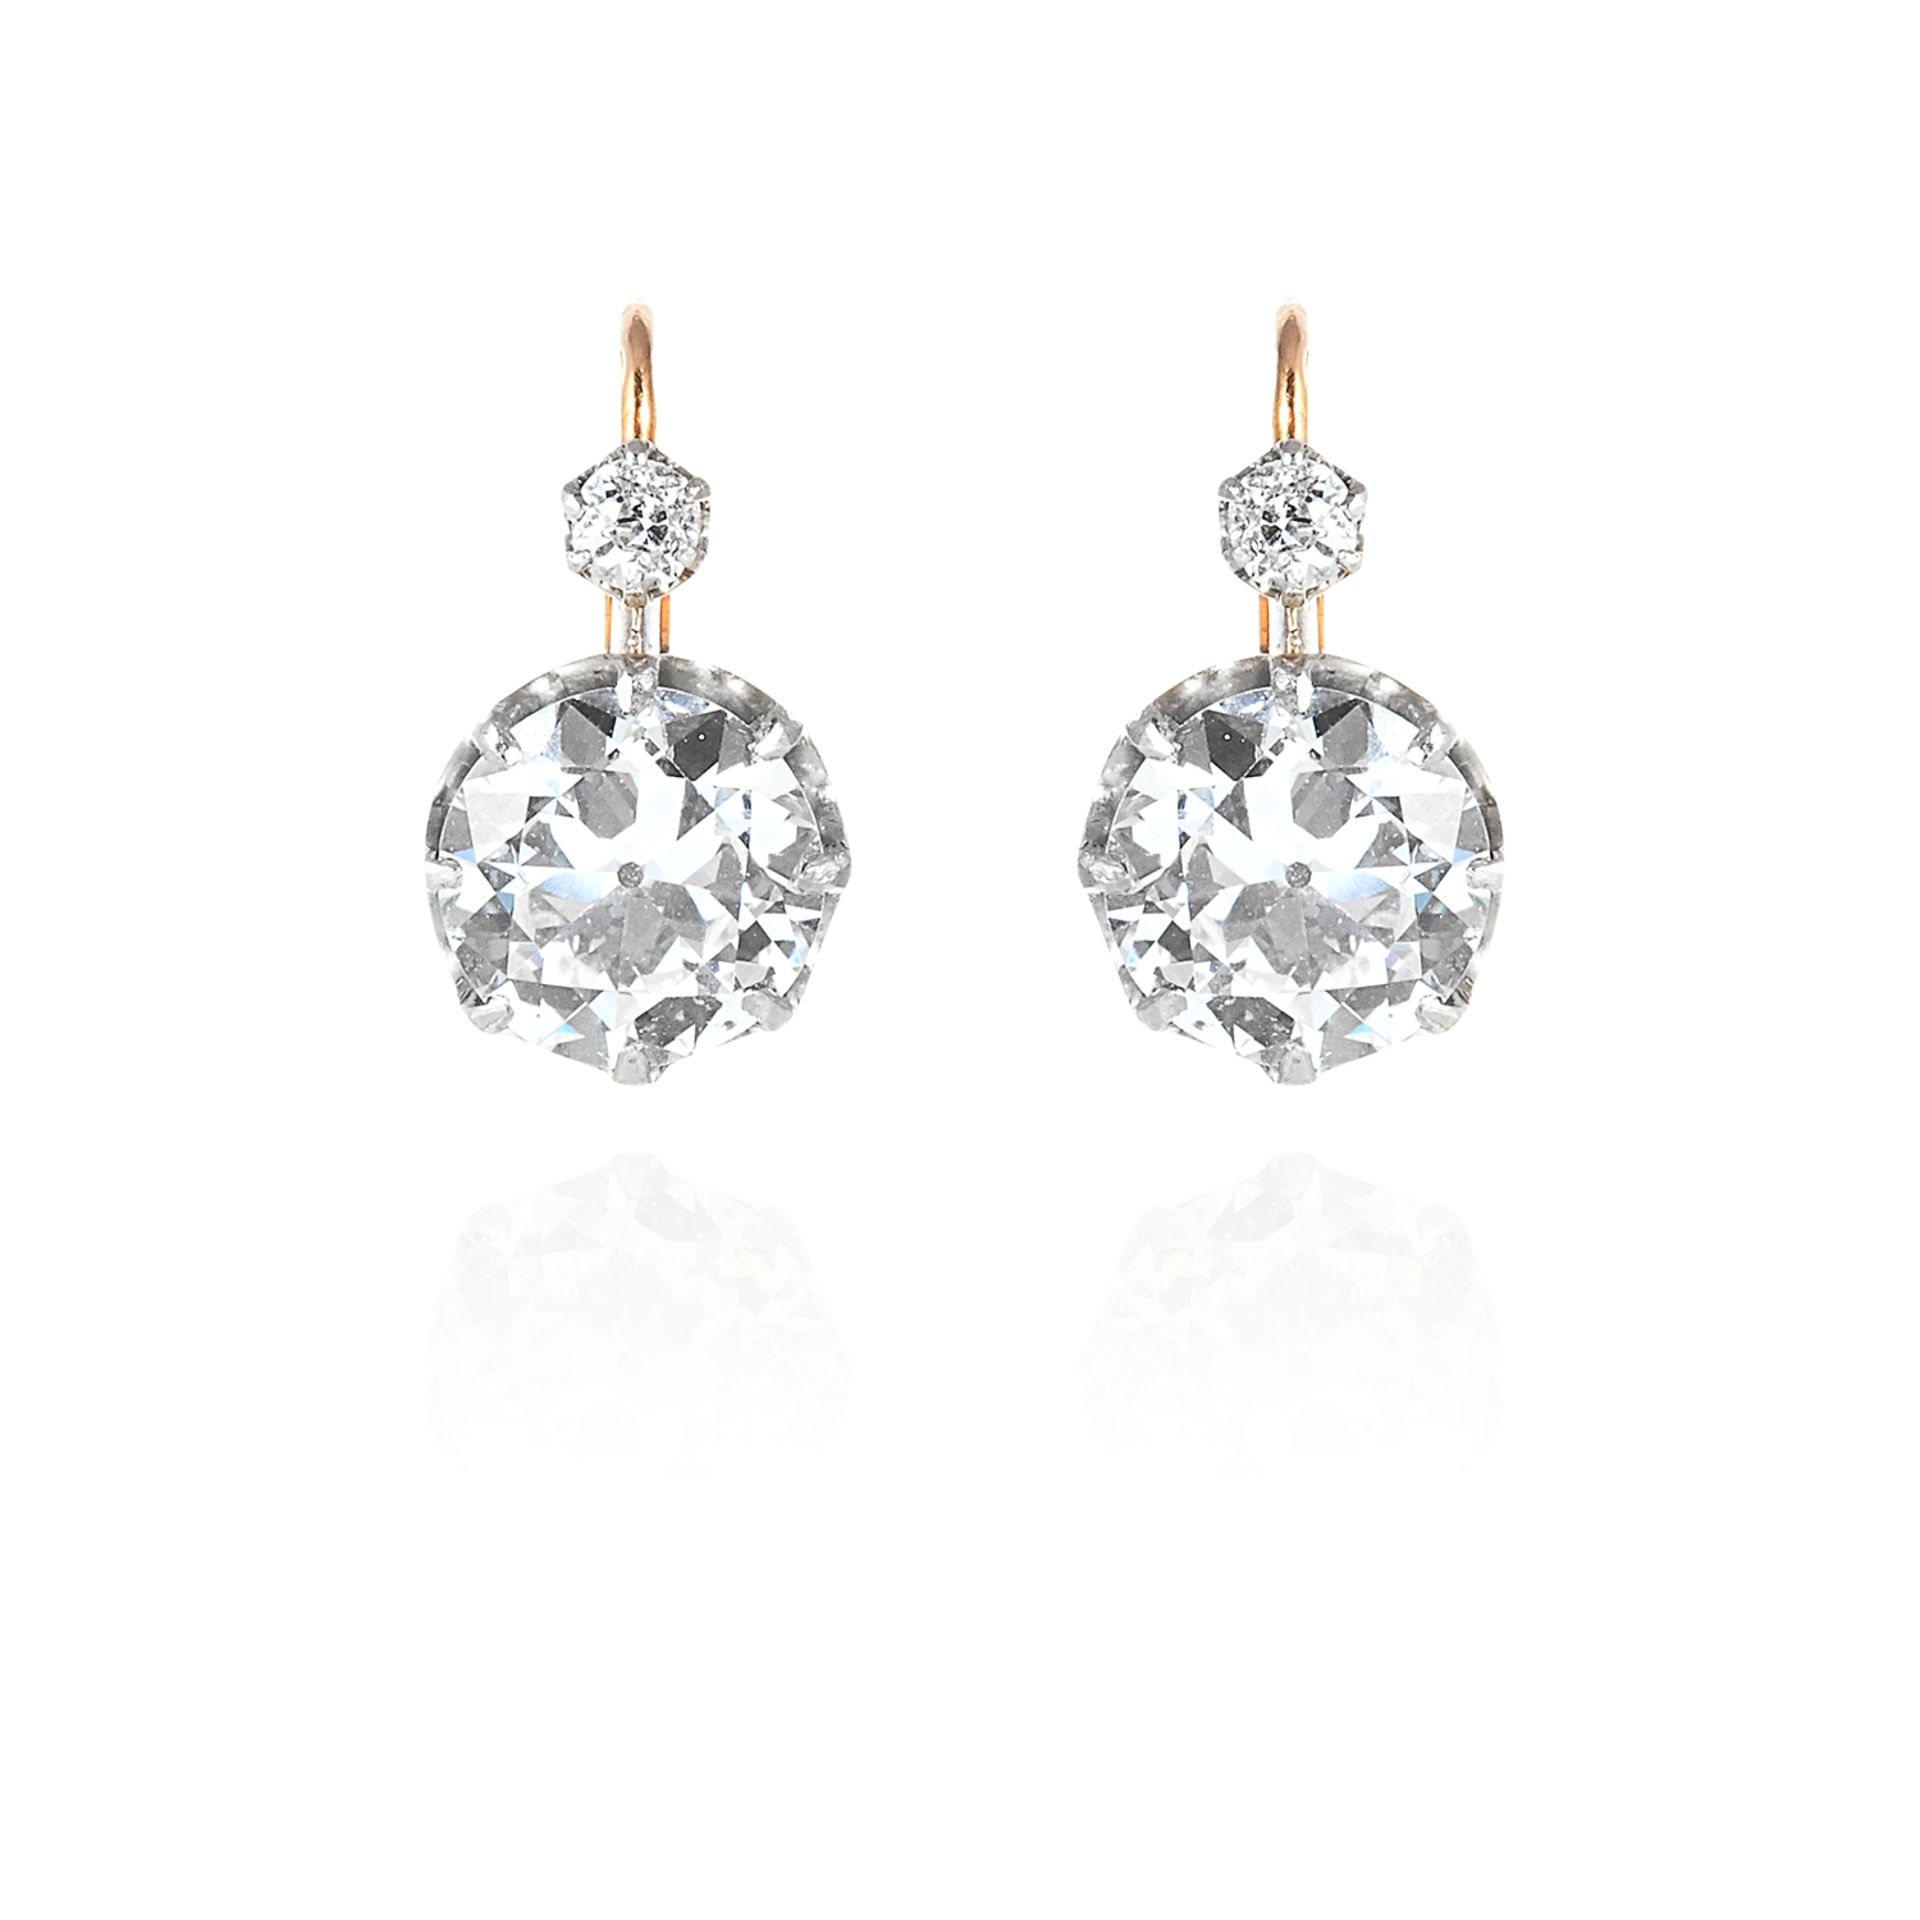 A PAIR OF ANTIQUE DIAMOND EARRINGS in 18ct yellow gold and silver, each set with an old round cut